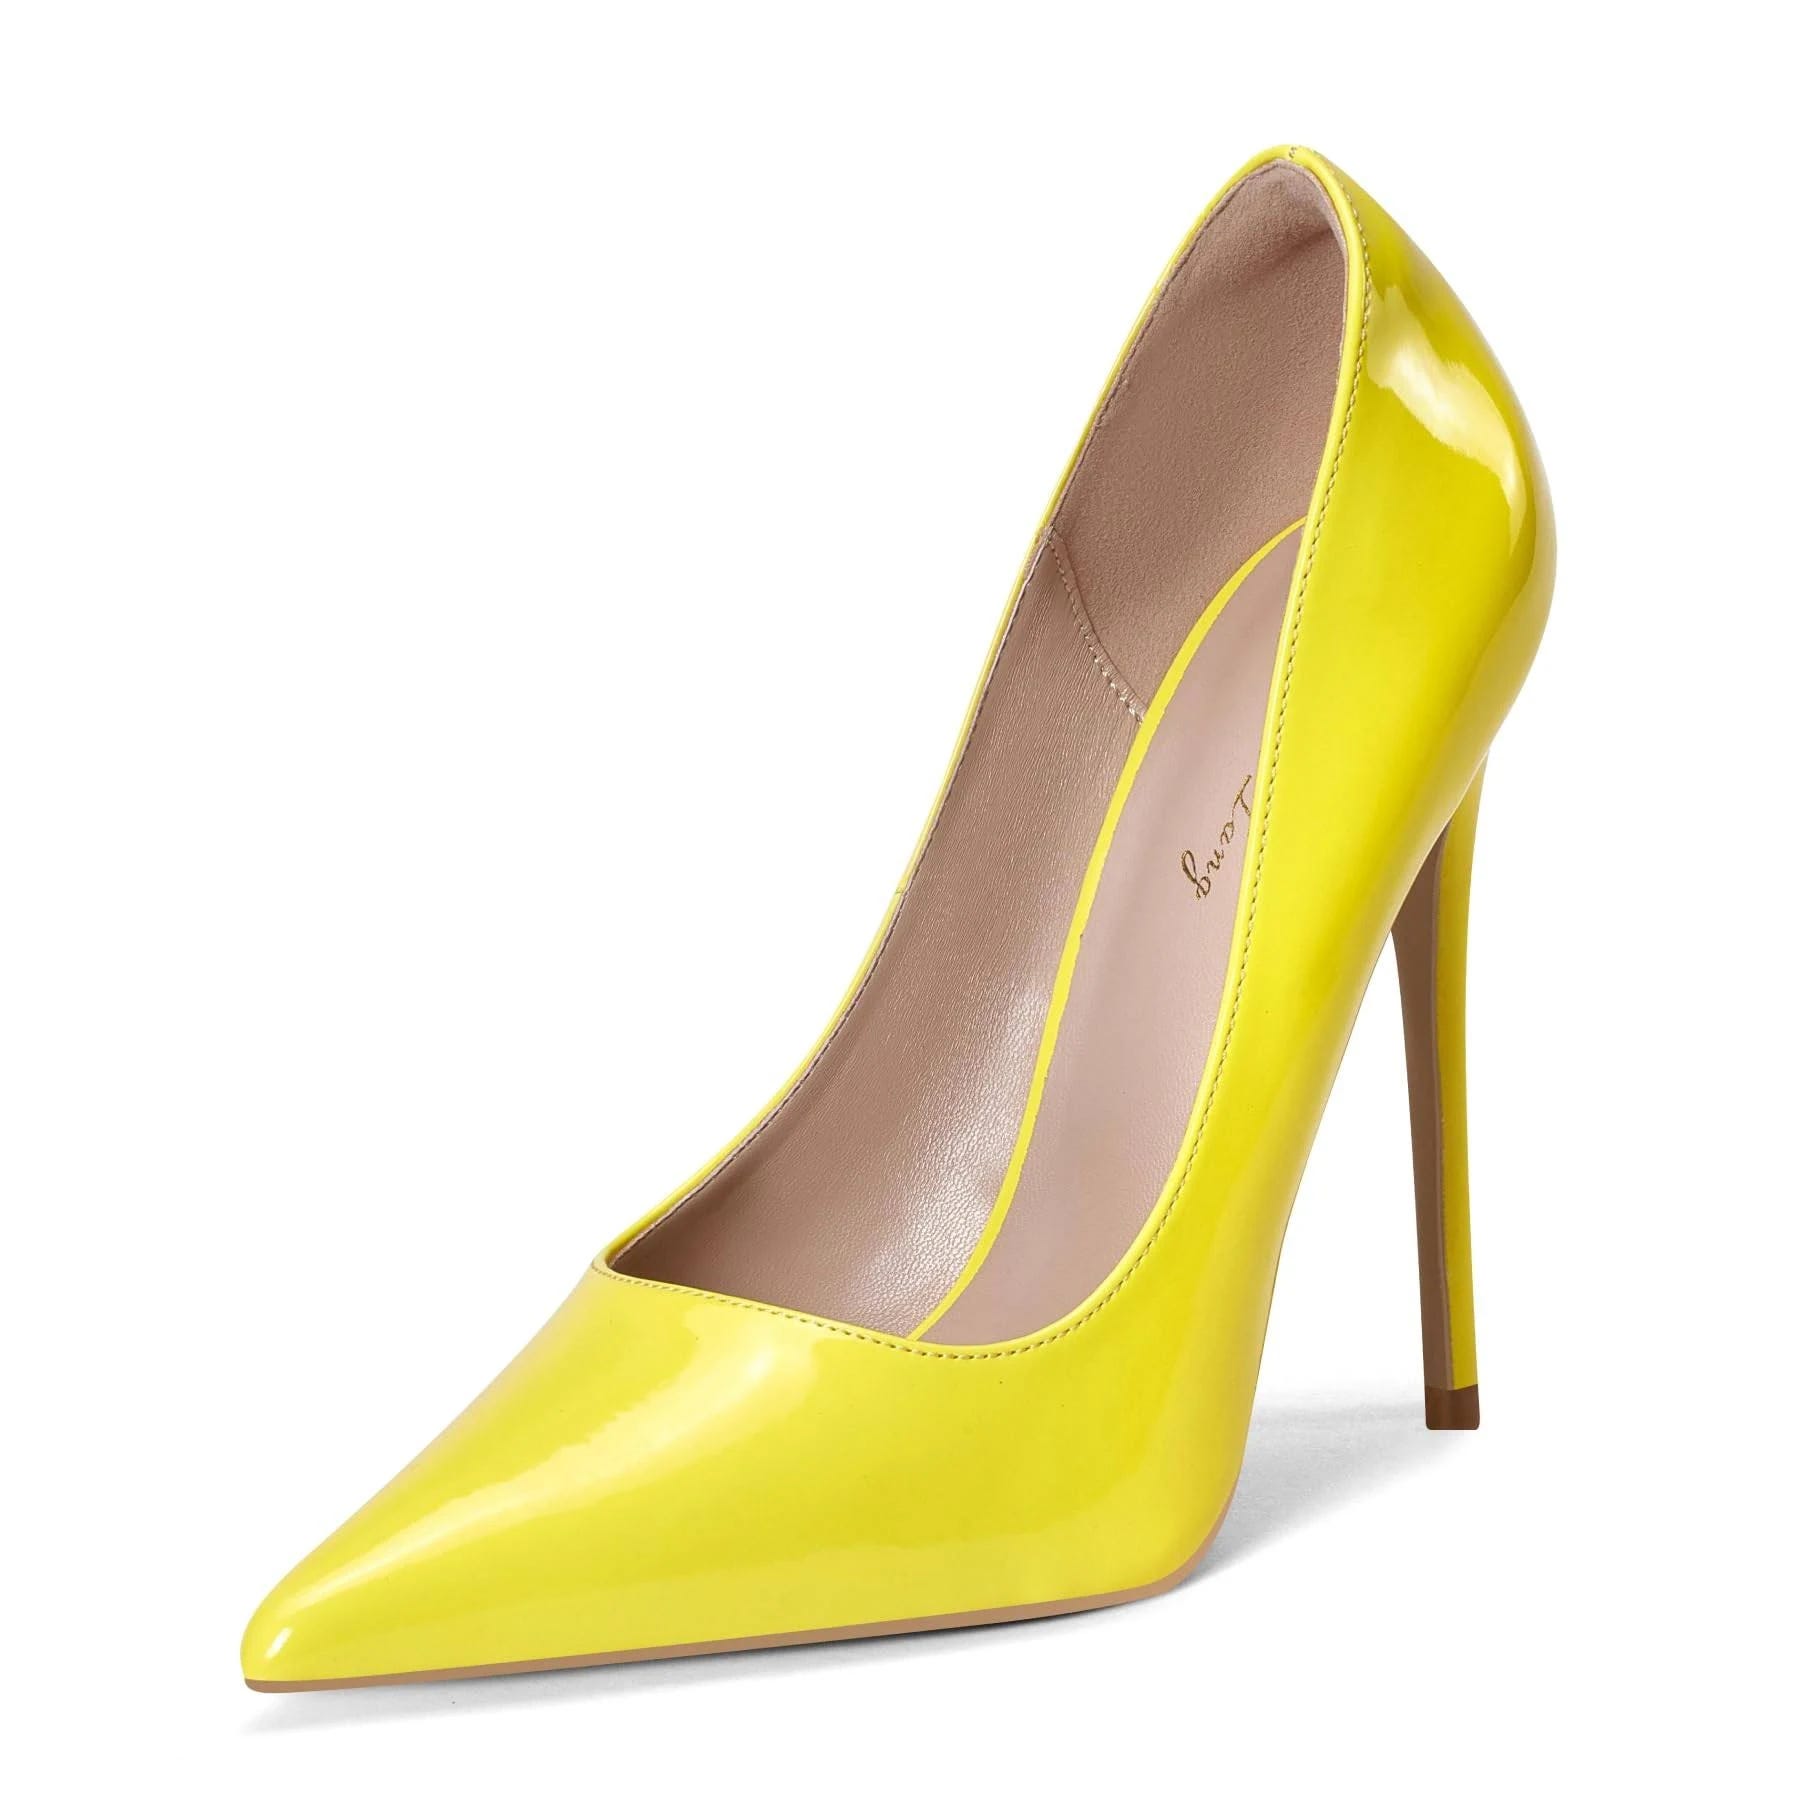 Elegant Bright Colored Heels for Confident Style | Image